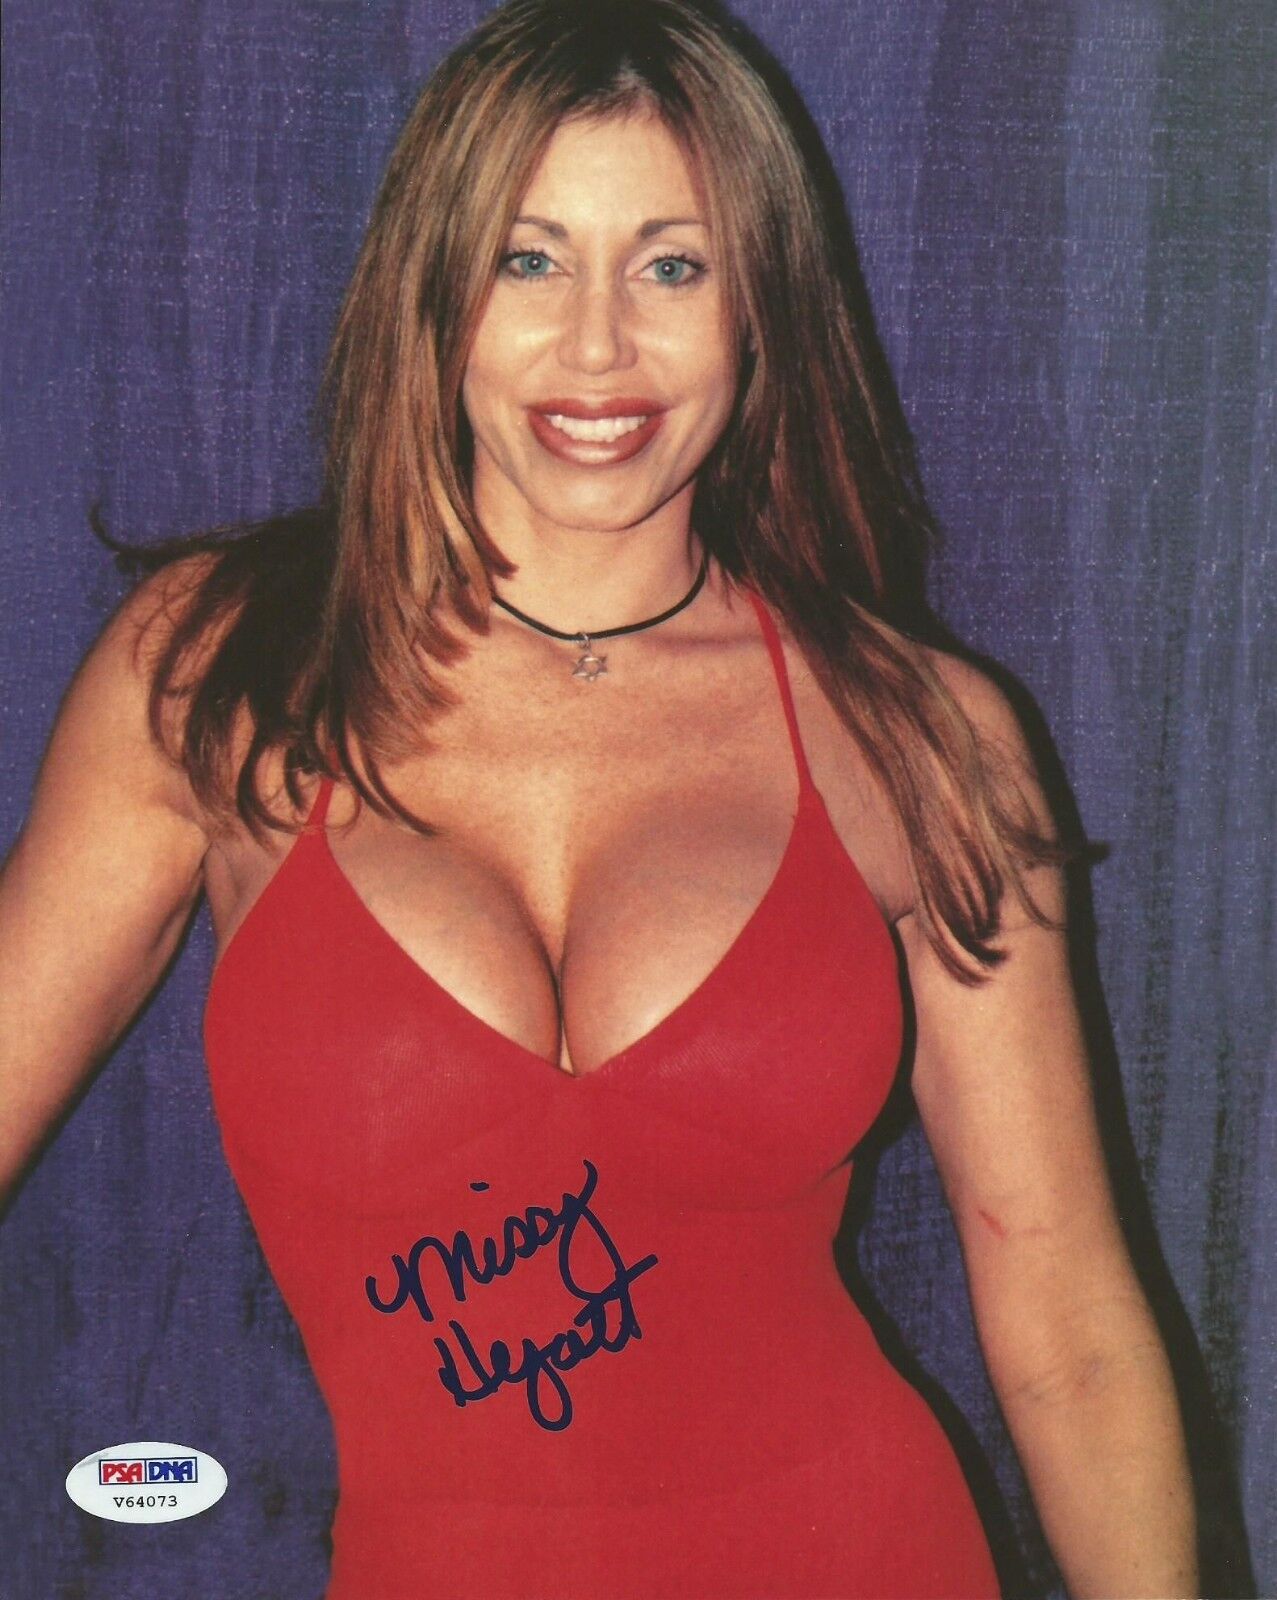 Missy Hyatt Signed 8x10 Photo Poster painting PSA/DNA COA WWE WCW ECW Picture Autograph Diva 1